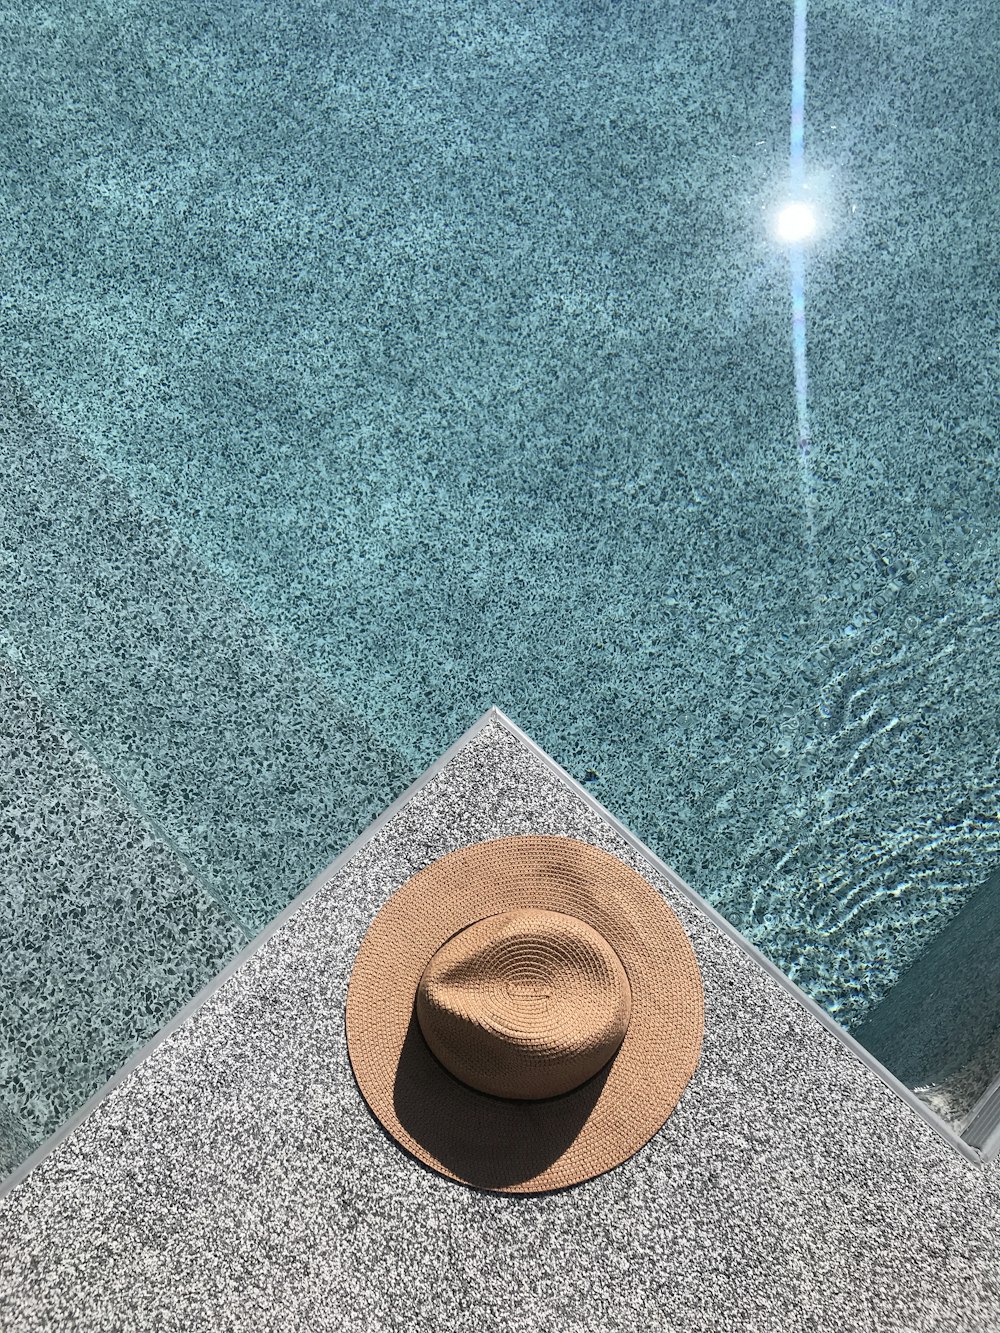 a hat sitting on the edge of a swimming pool